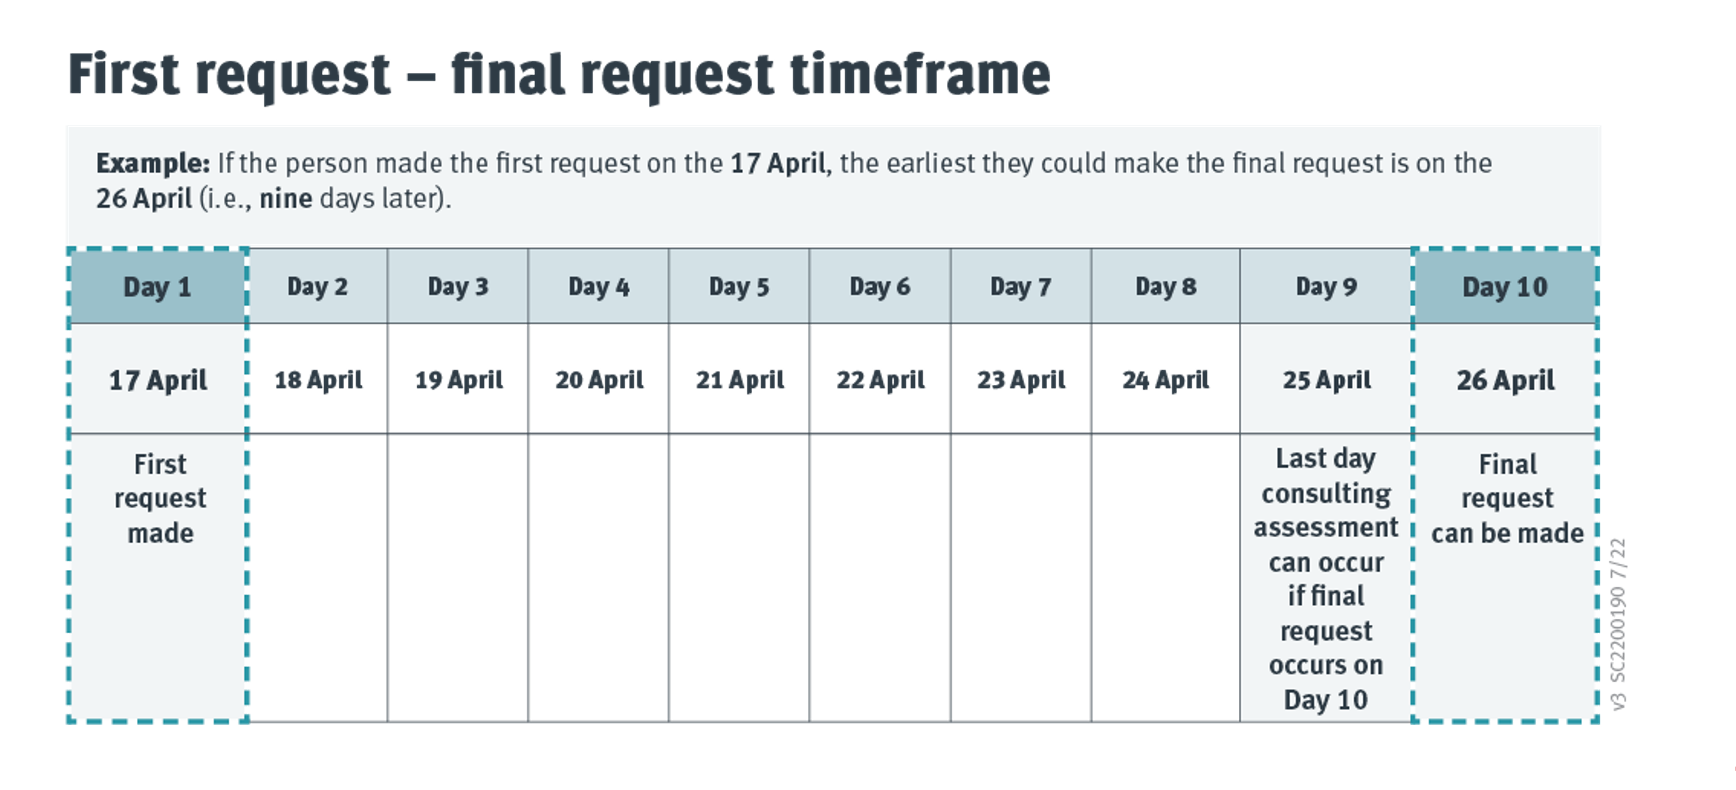 A timeline showing 10 days which illustrates the earliest day a person could make the final request is on Day 9.